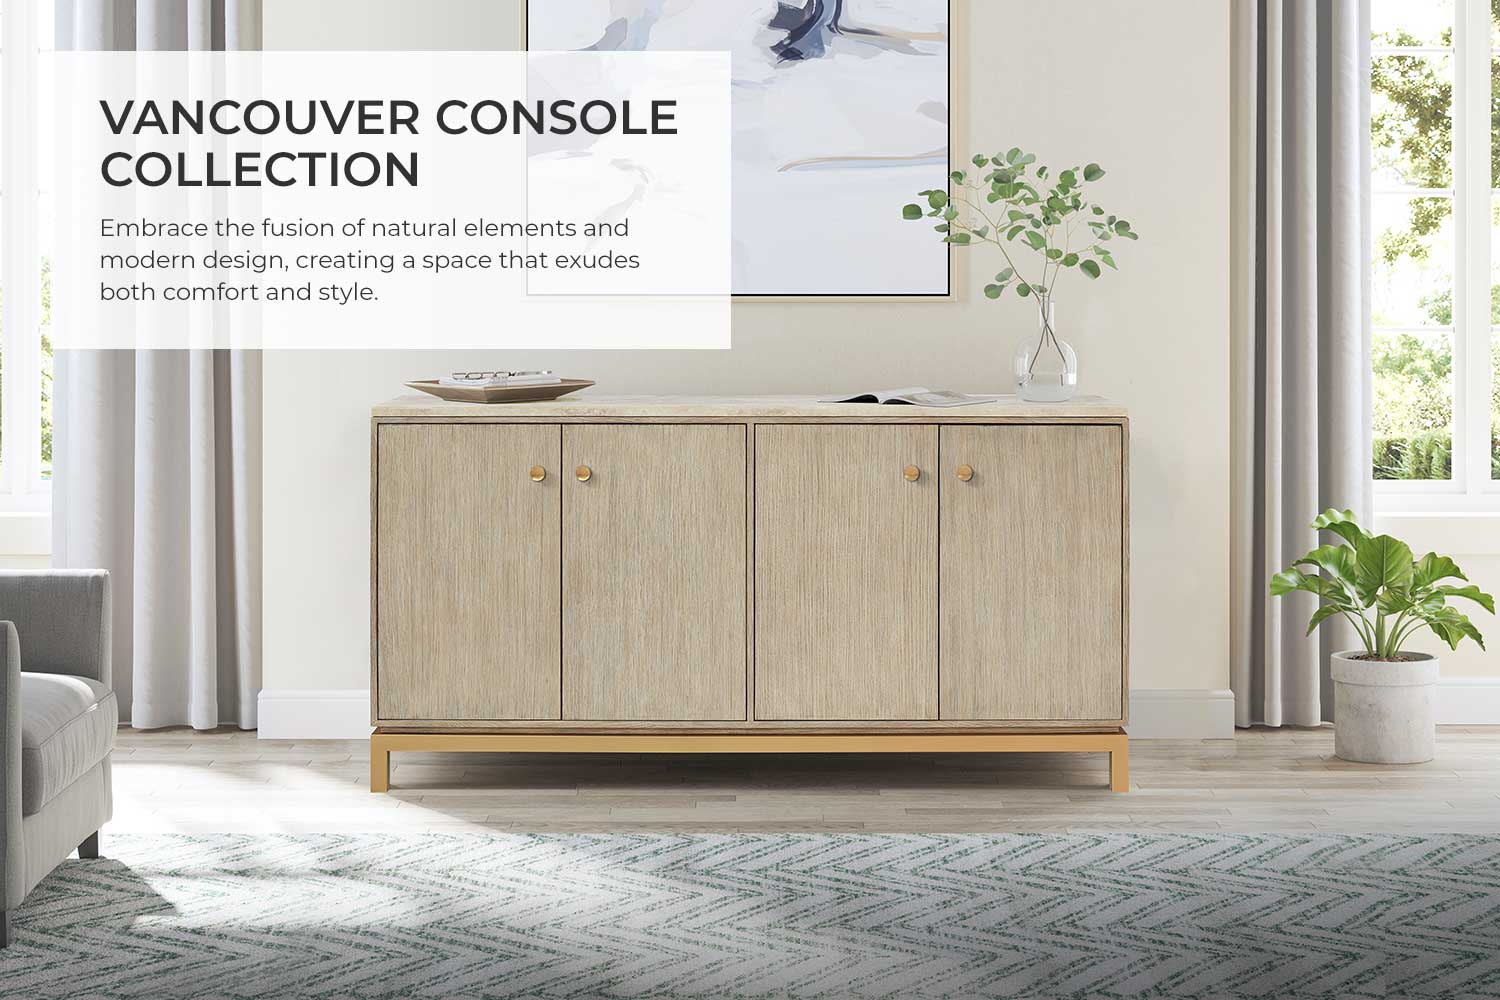 Vancouver Console Collection